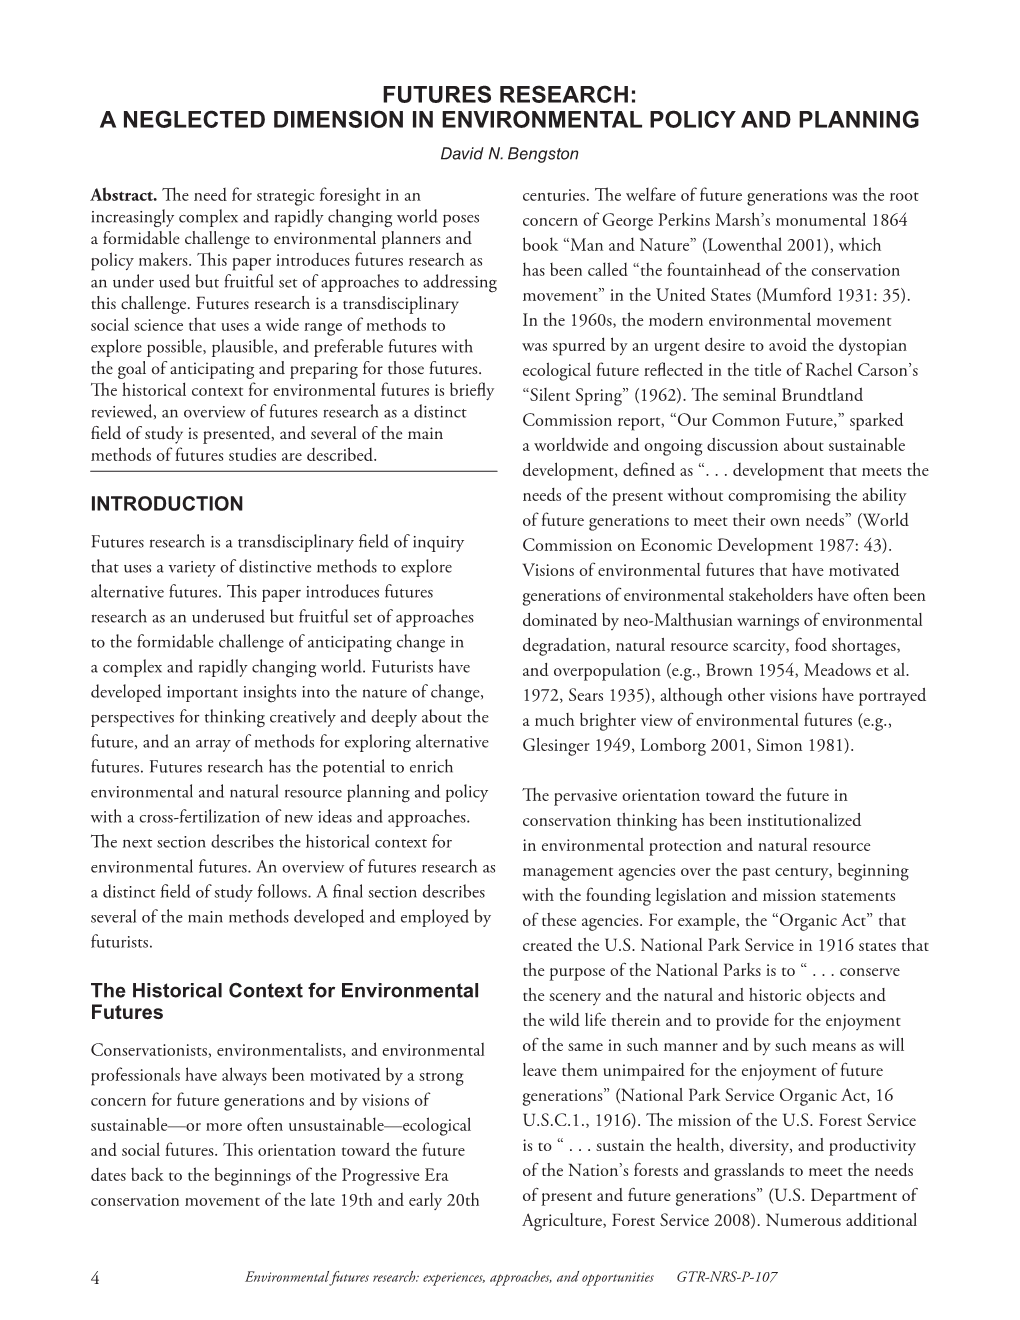 FUTURES RESEARCH: a NEGLECTED DIMENSION in ENVIRONMENTAL POLICY and PLANNING David N